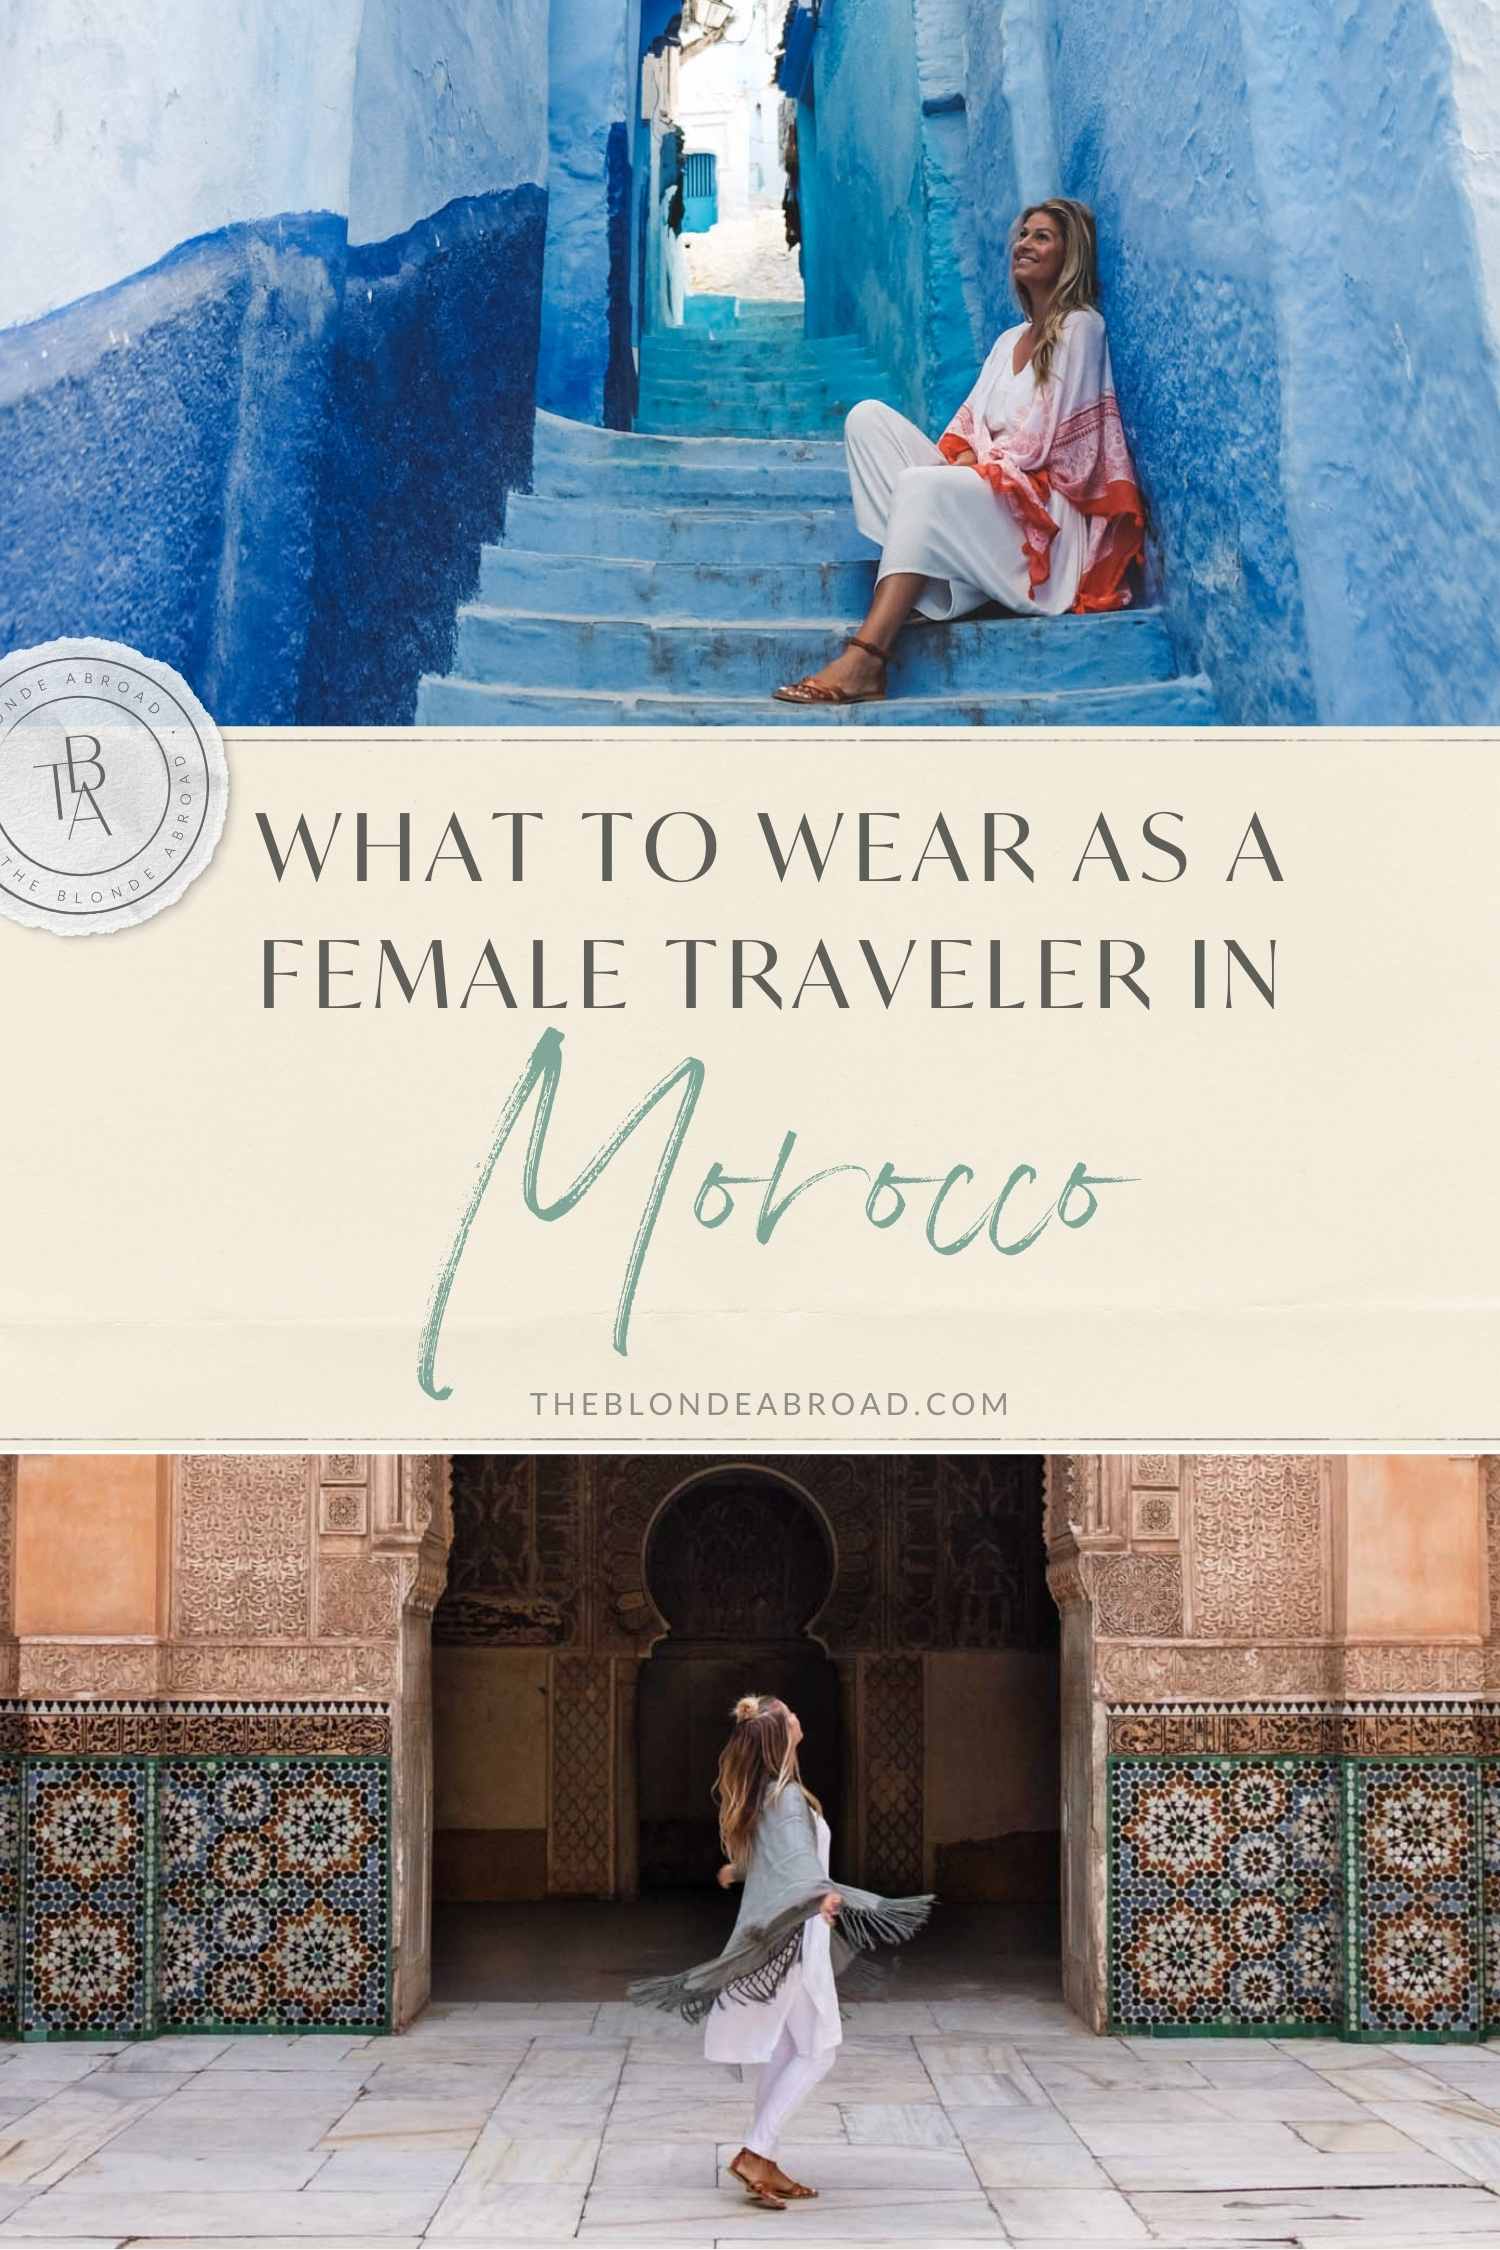 https://www.theblondeabroad.com/wp-content/uploads/2017/08/What-to-wear-as-a-female-traveler-in-morocco.jpg